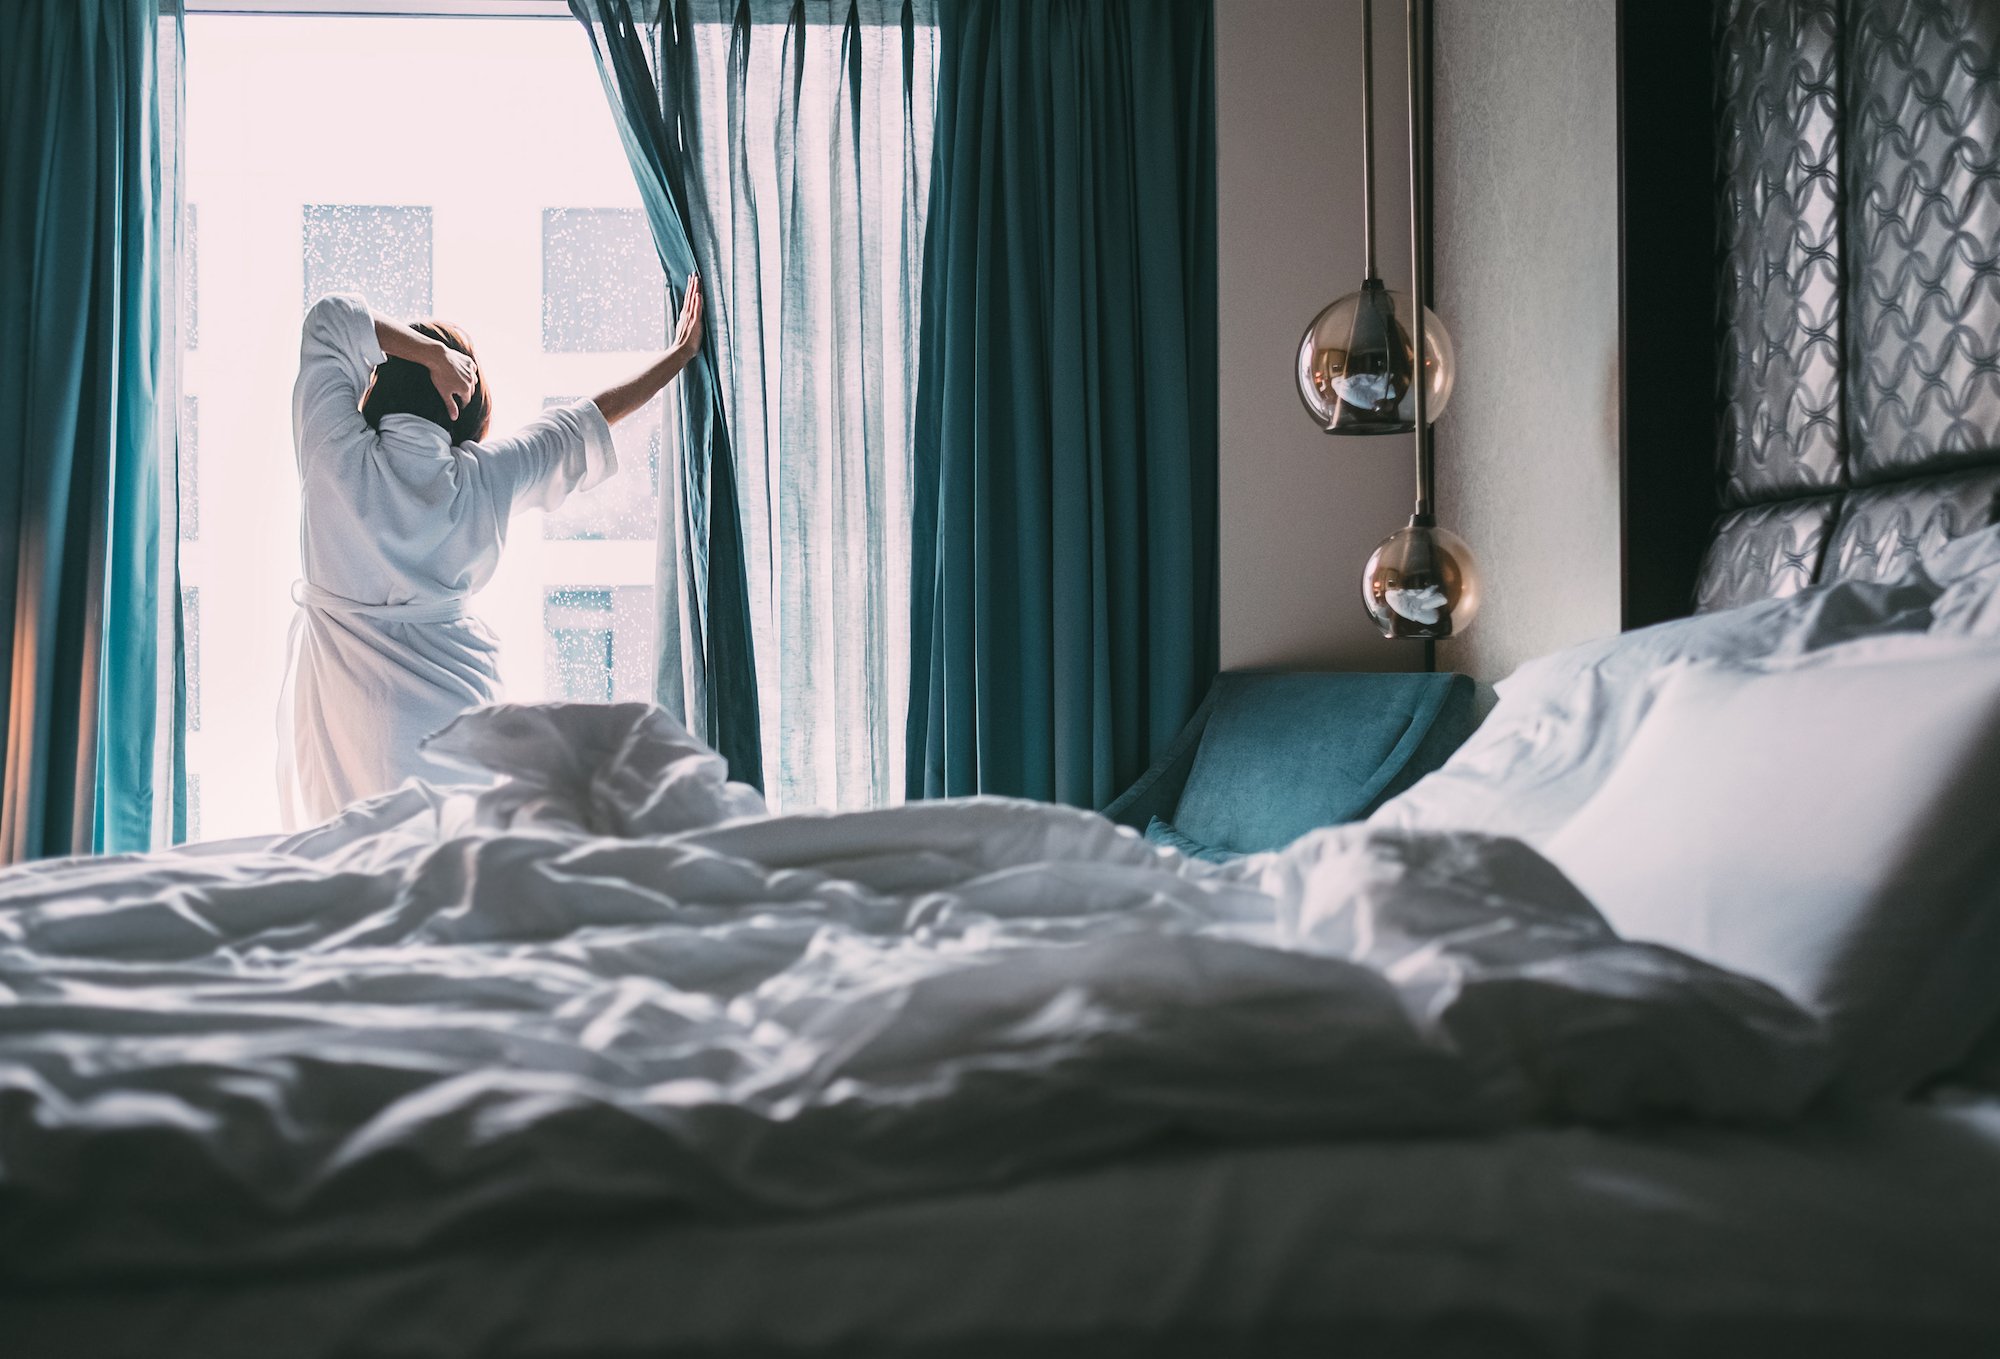 A picture of a woman standing in front of an open window in the bedroom